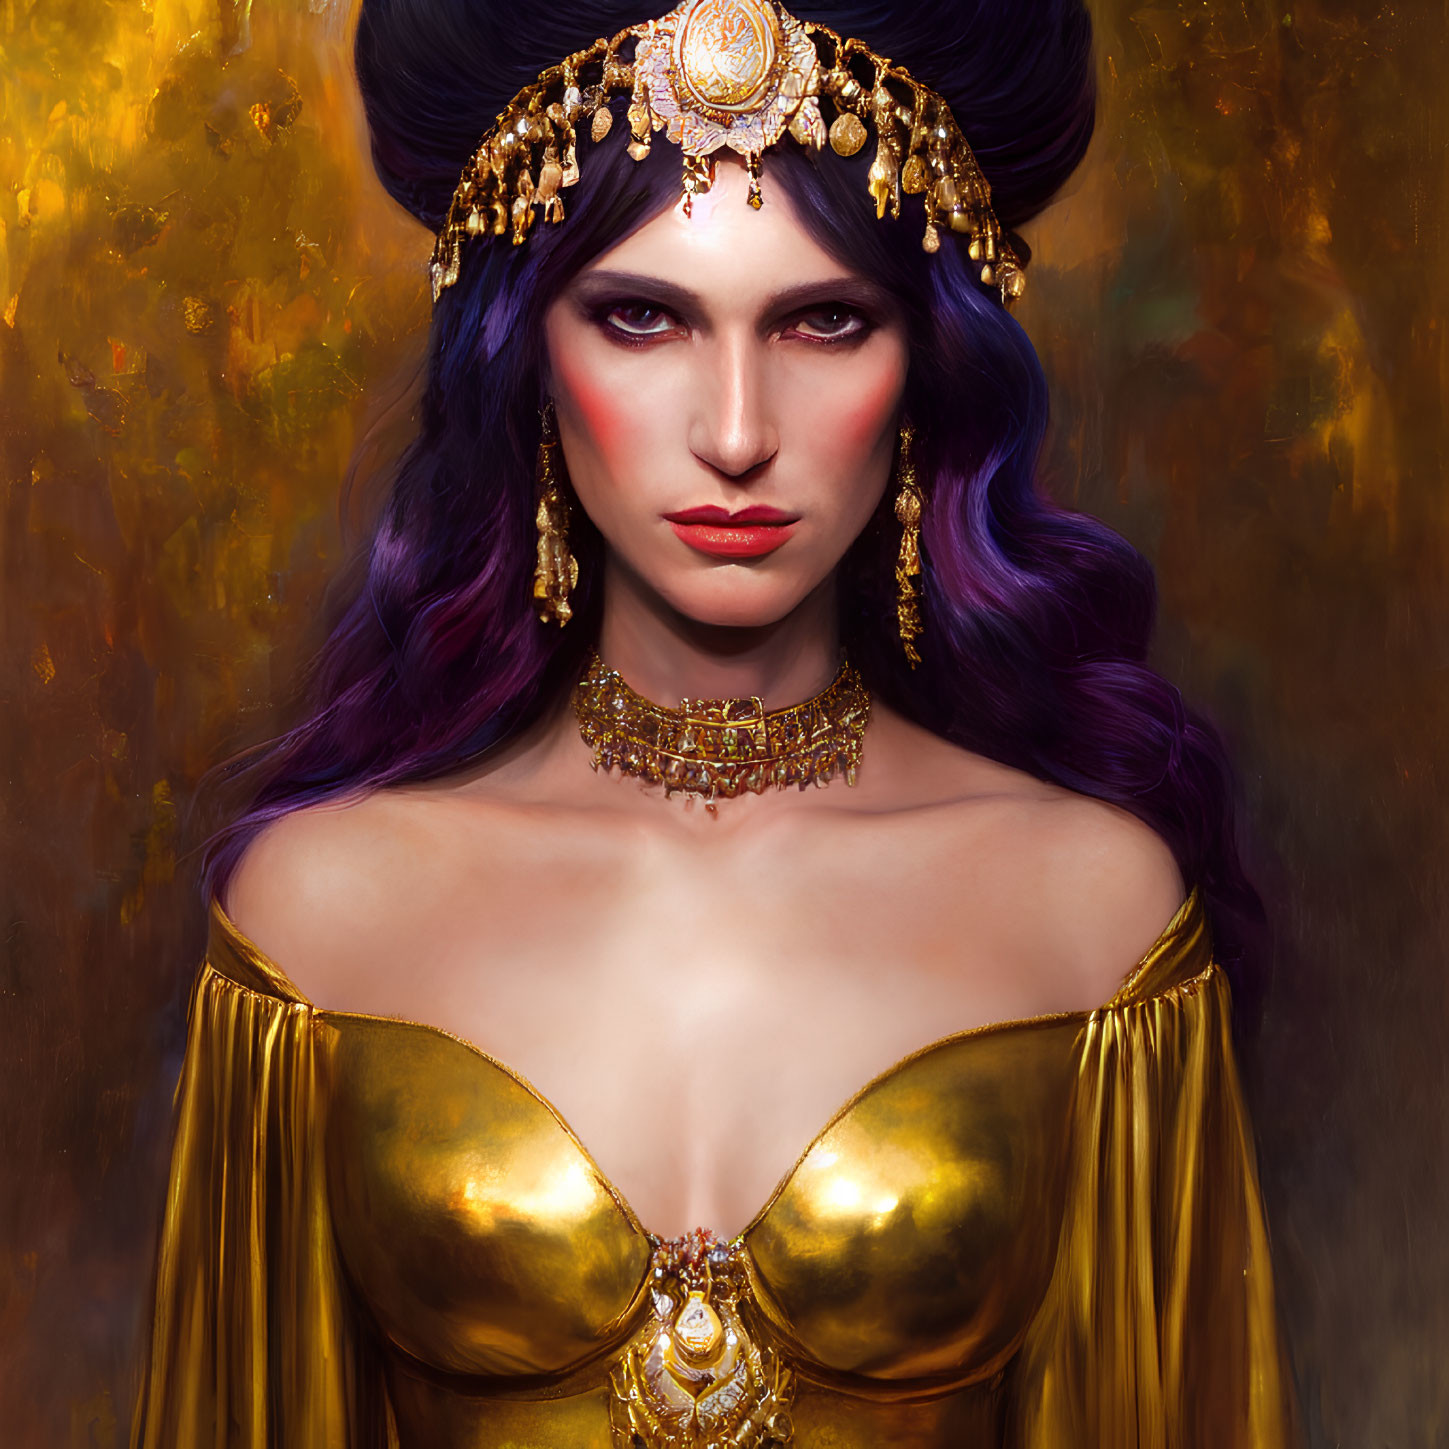 Digital Artwork: Woman with Purple Hair and Golden Headdress in Opulent Gown